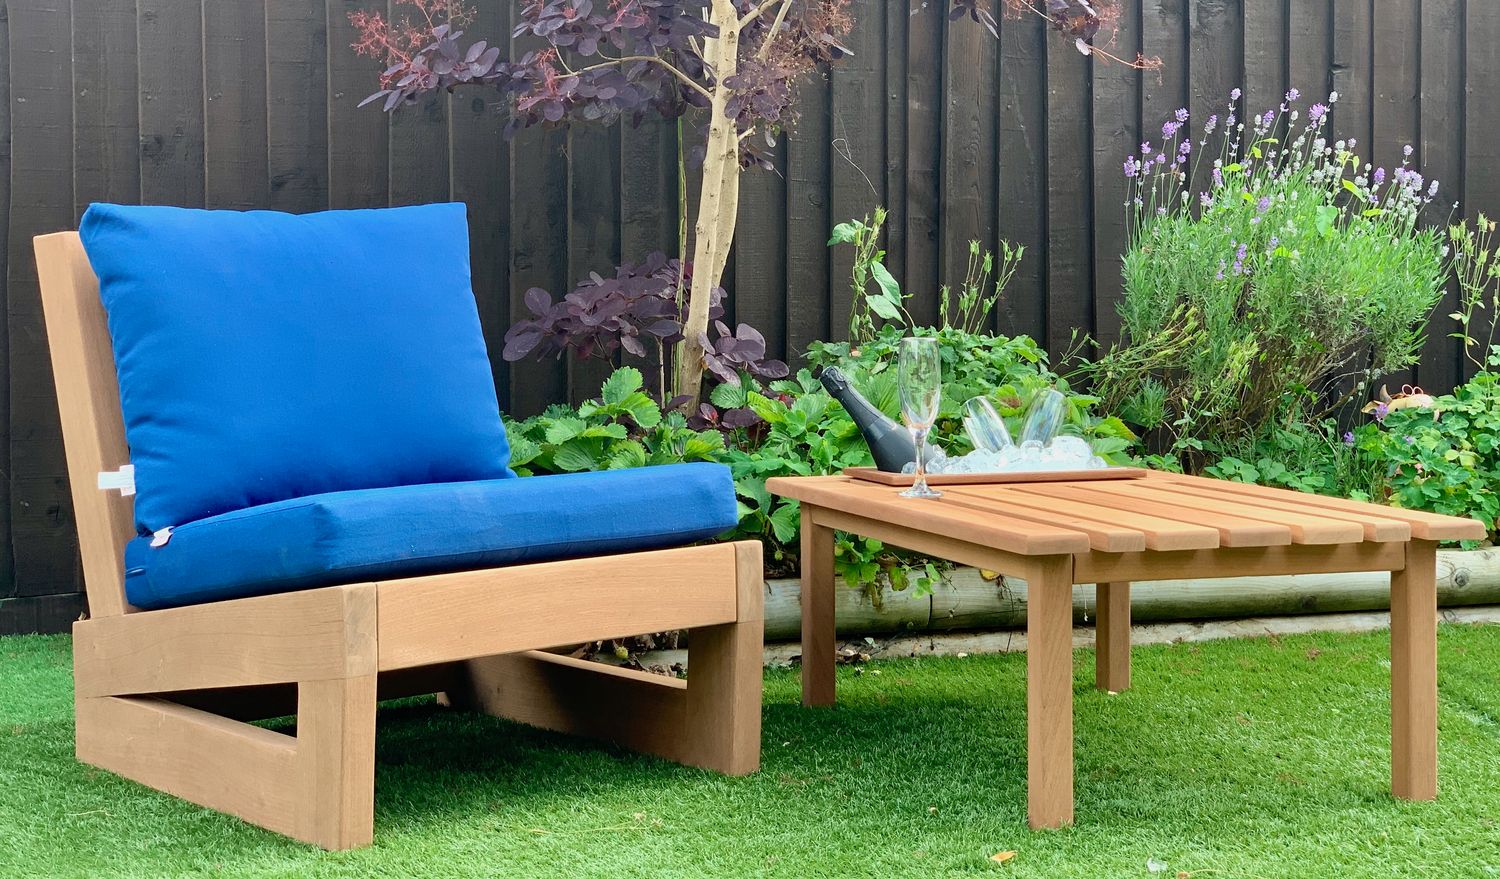 Sapele garden chair SPECIAL OFFER SAVE £140